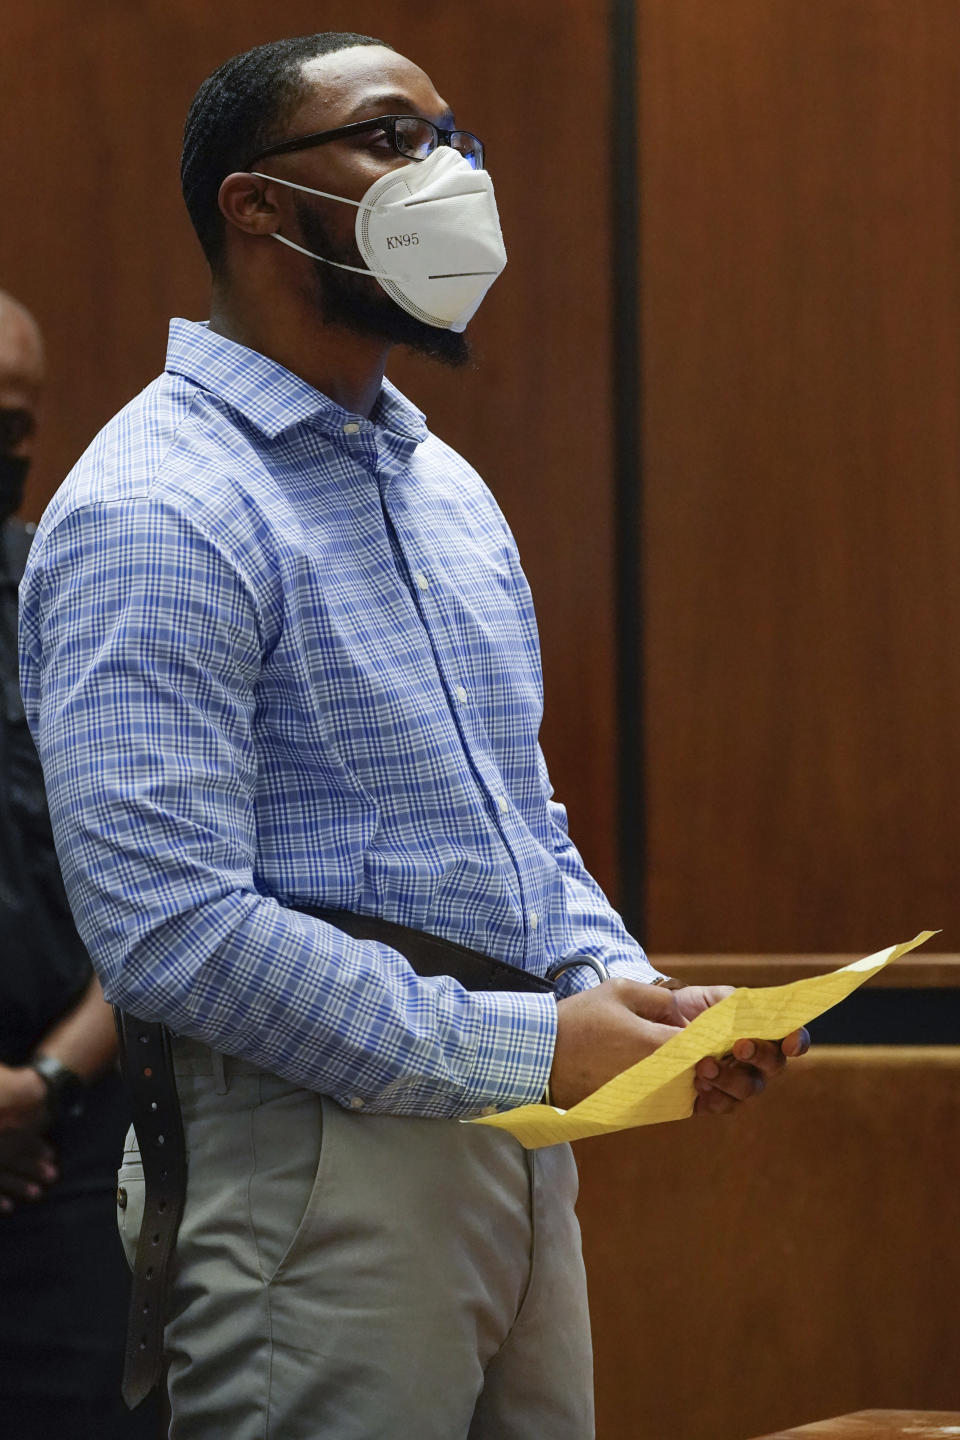 Khalil Wheeler-Weaver, 25, reads a statement during his sentencing in Newark, N.J., Wednesday, Oct. 6, 2021. The New Jersey man who used dating apps to lure three women to their deaths and attempted to kill a fourth woman five years ago was sentenced to 160 years in prison on Wednesday, as he defiantly proclaimed his innocence. (AP Photo/Seth Wenig, Pool)